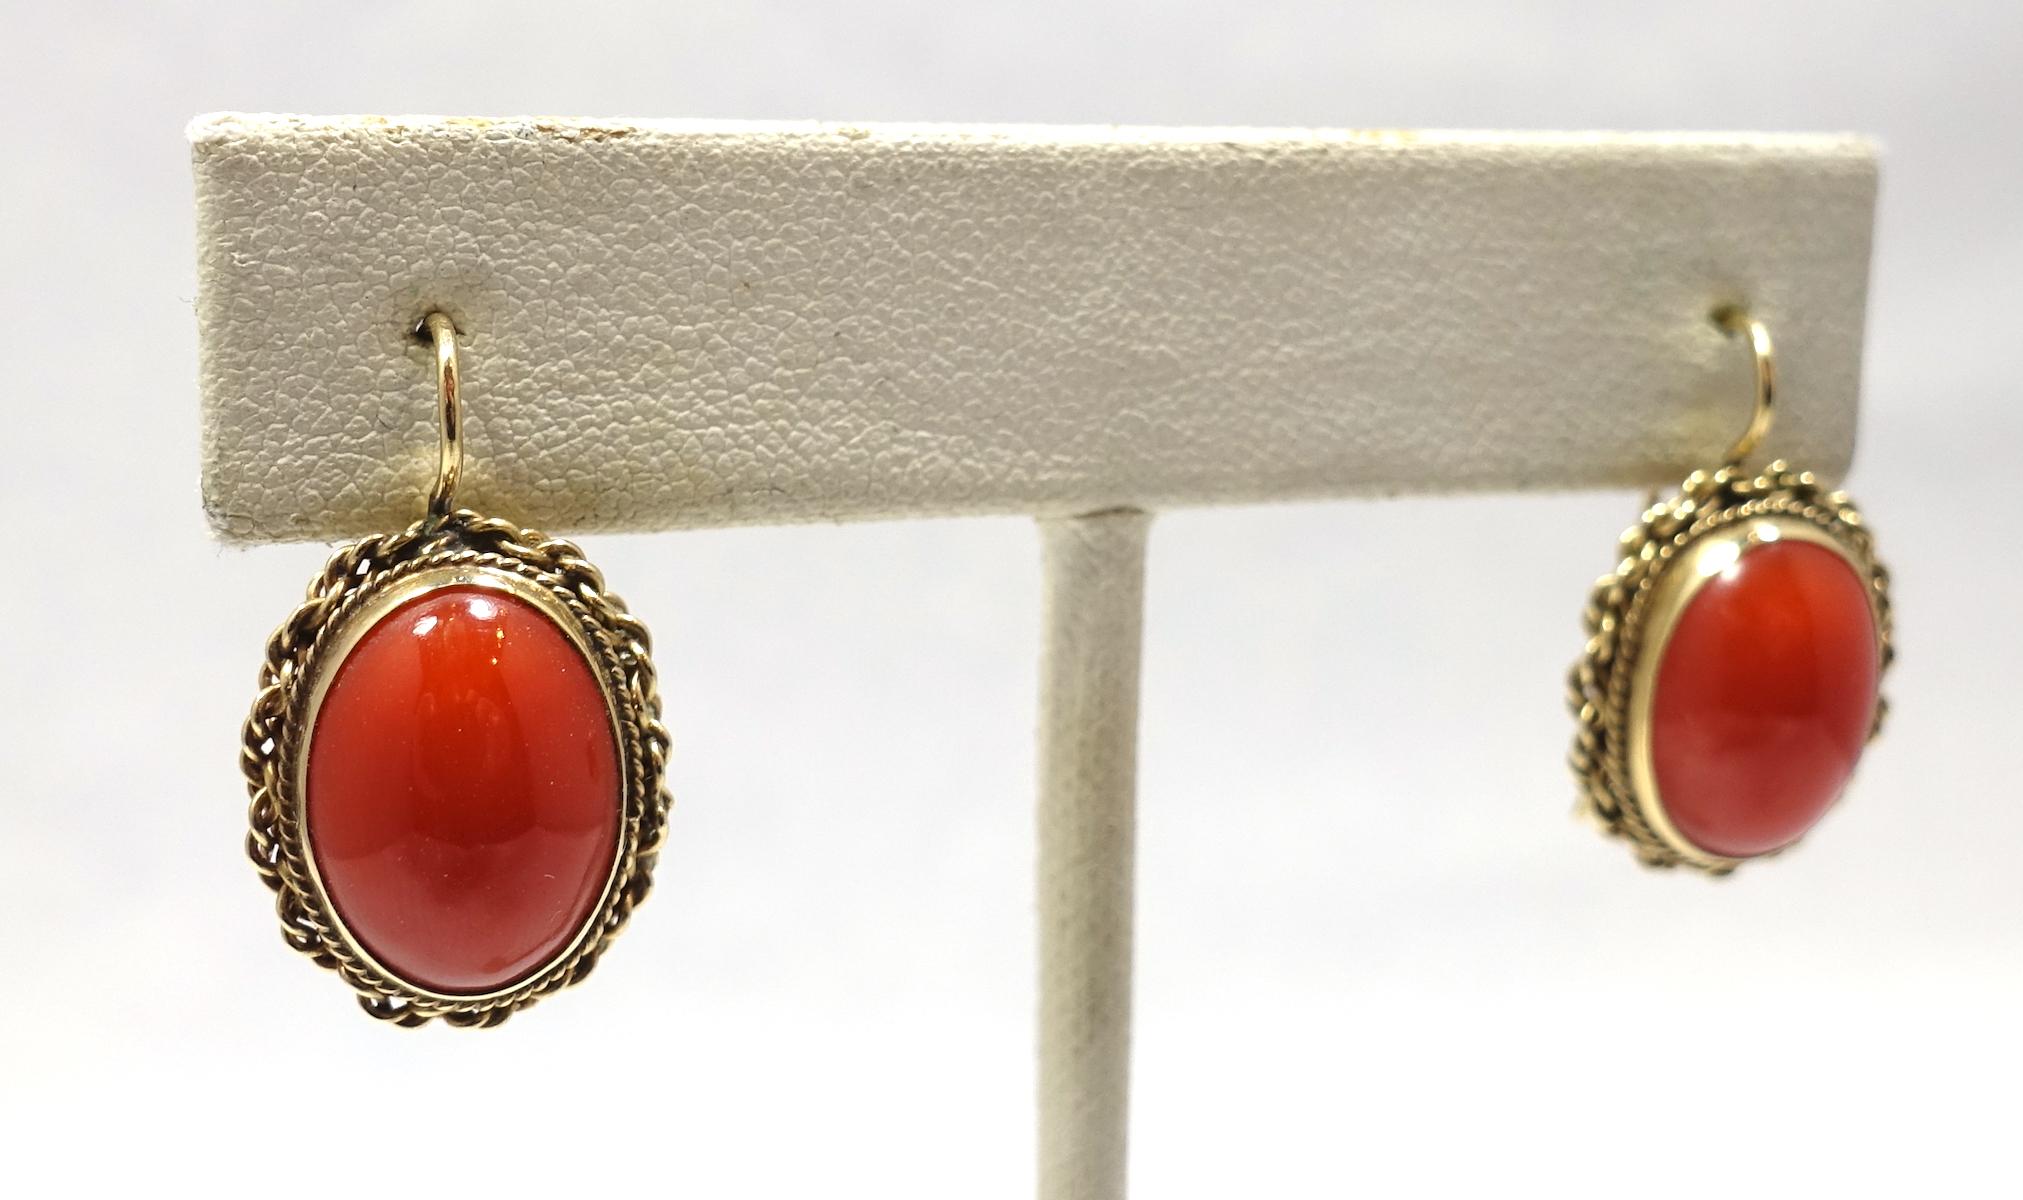 These vintage earrings feature cabochon blood coral stones in a 14kt gold setting.  These pierced earrings measure 3/4” x 5/8” and are in excellent condition.